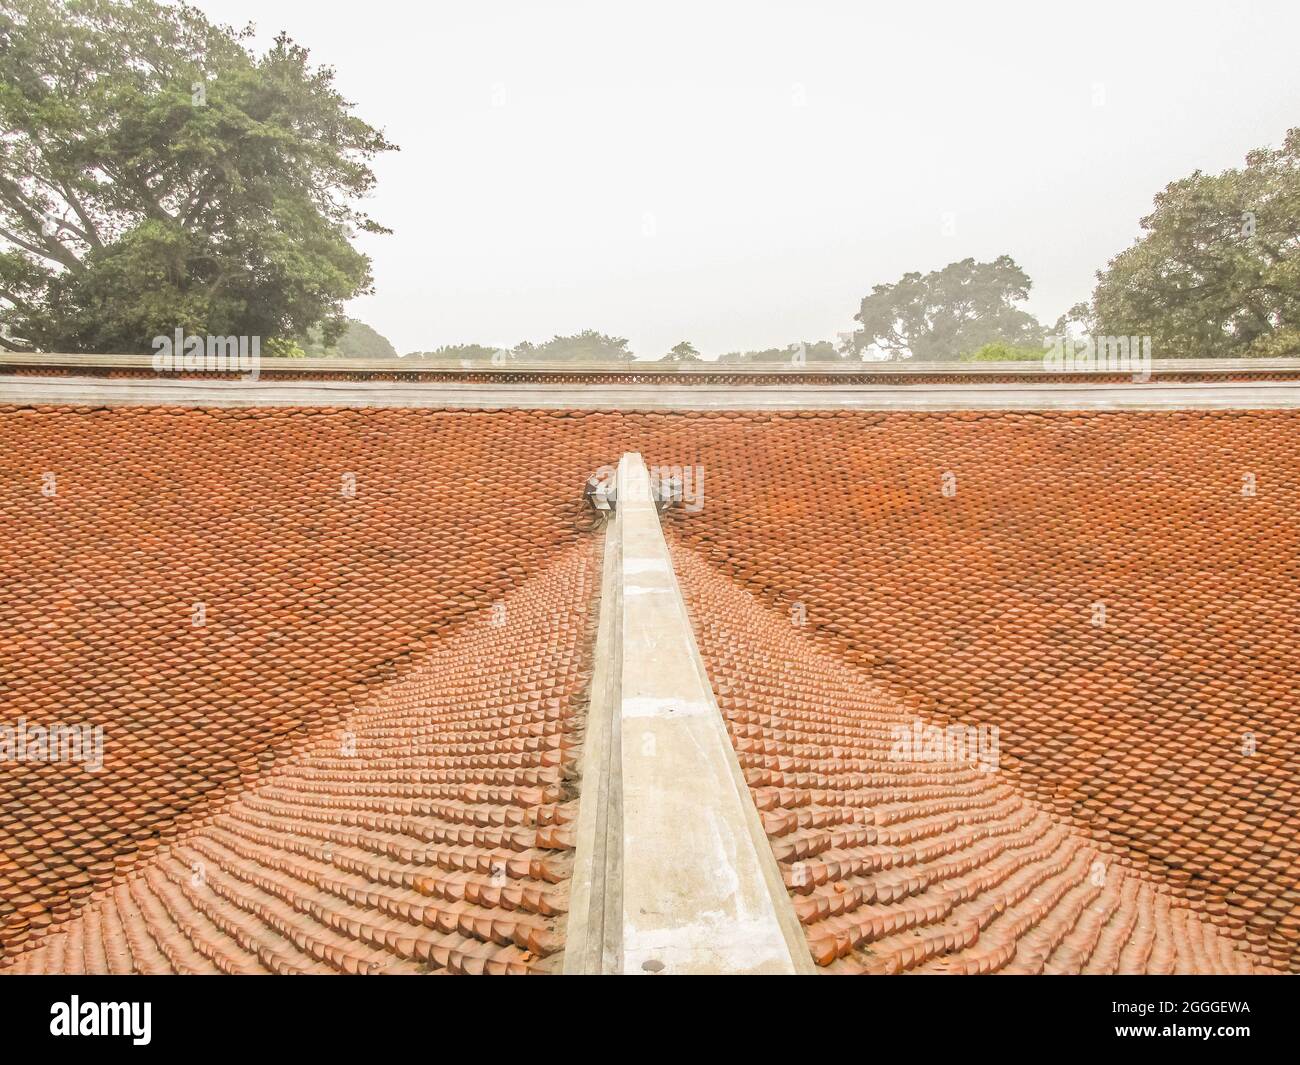 Ha Noi, Vietnam - January 20, 2016: the tiled roof of The Temple of Literature in Ha Noi, Vietnam Stock Photo